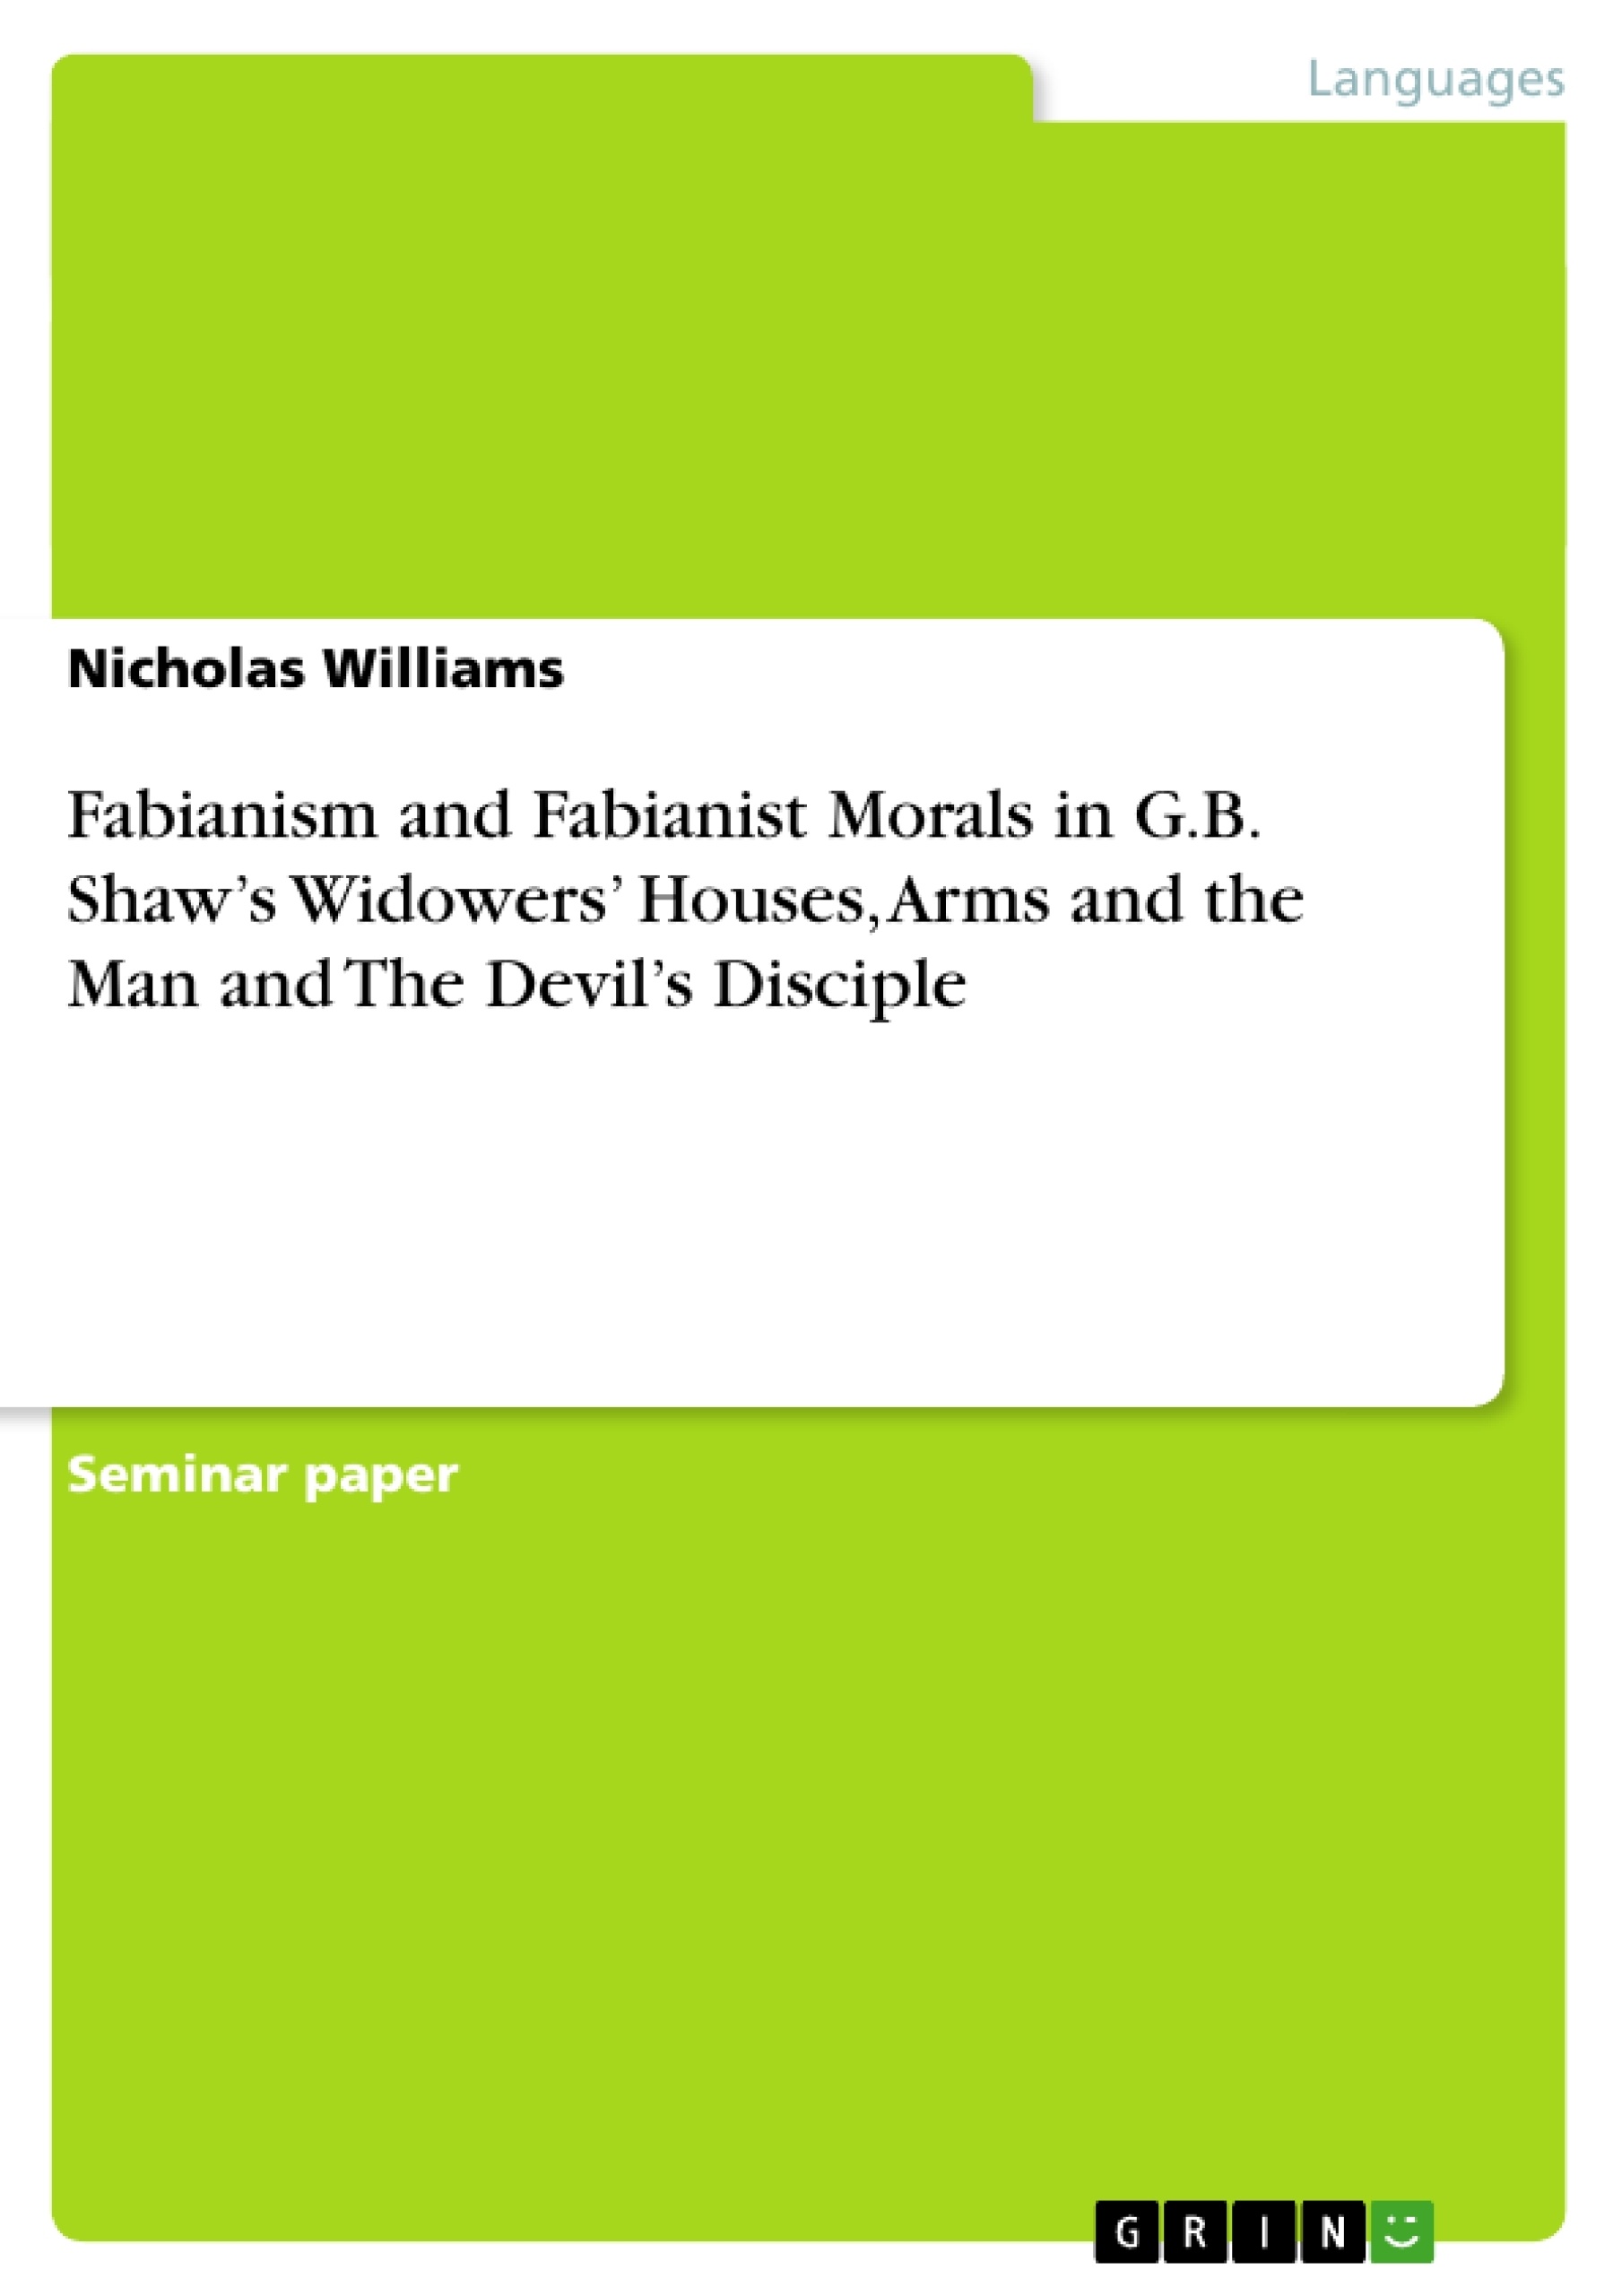 Titre: Fabianism and Fabianist Morals in G.B. Shaw’s Widowers’ Houses, Arms and the Man and The Devil’s Disciple